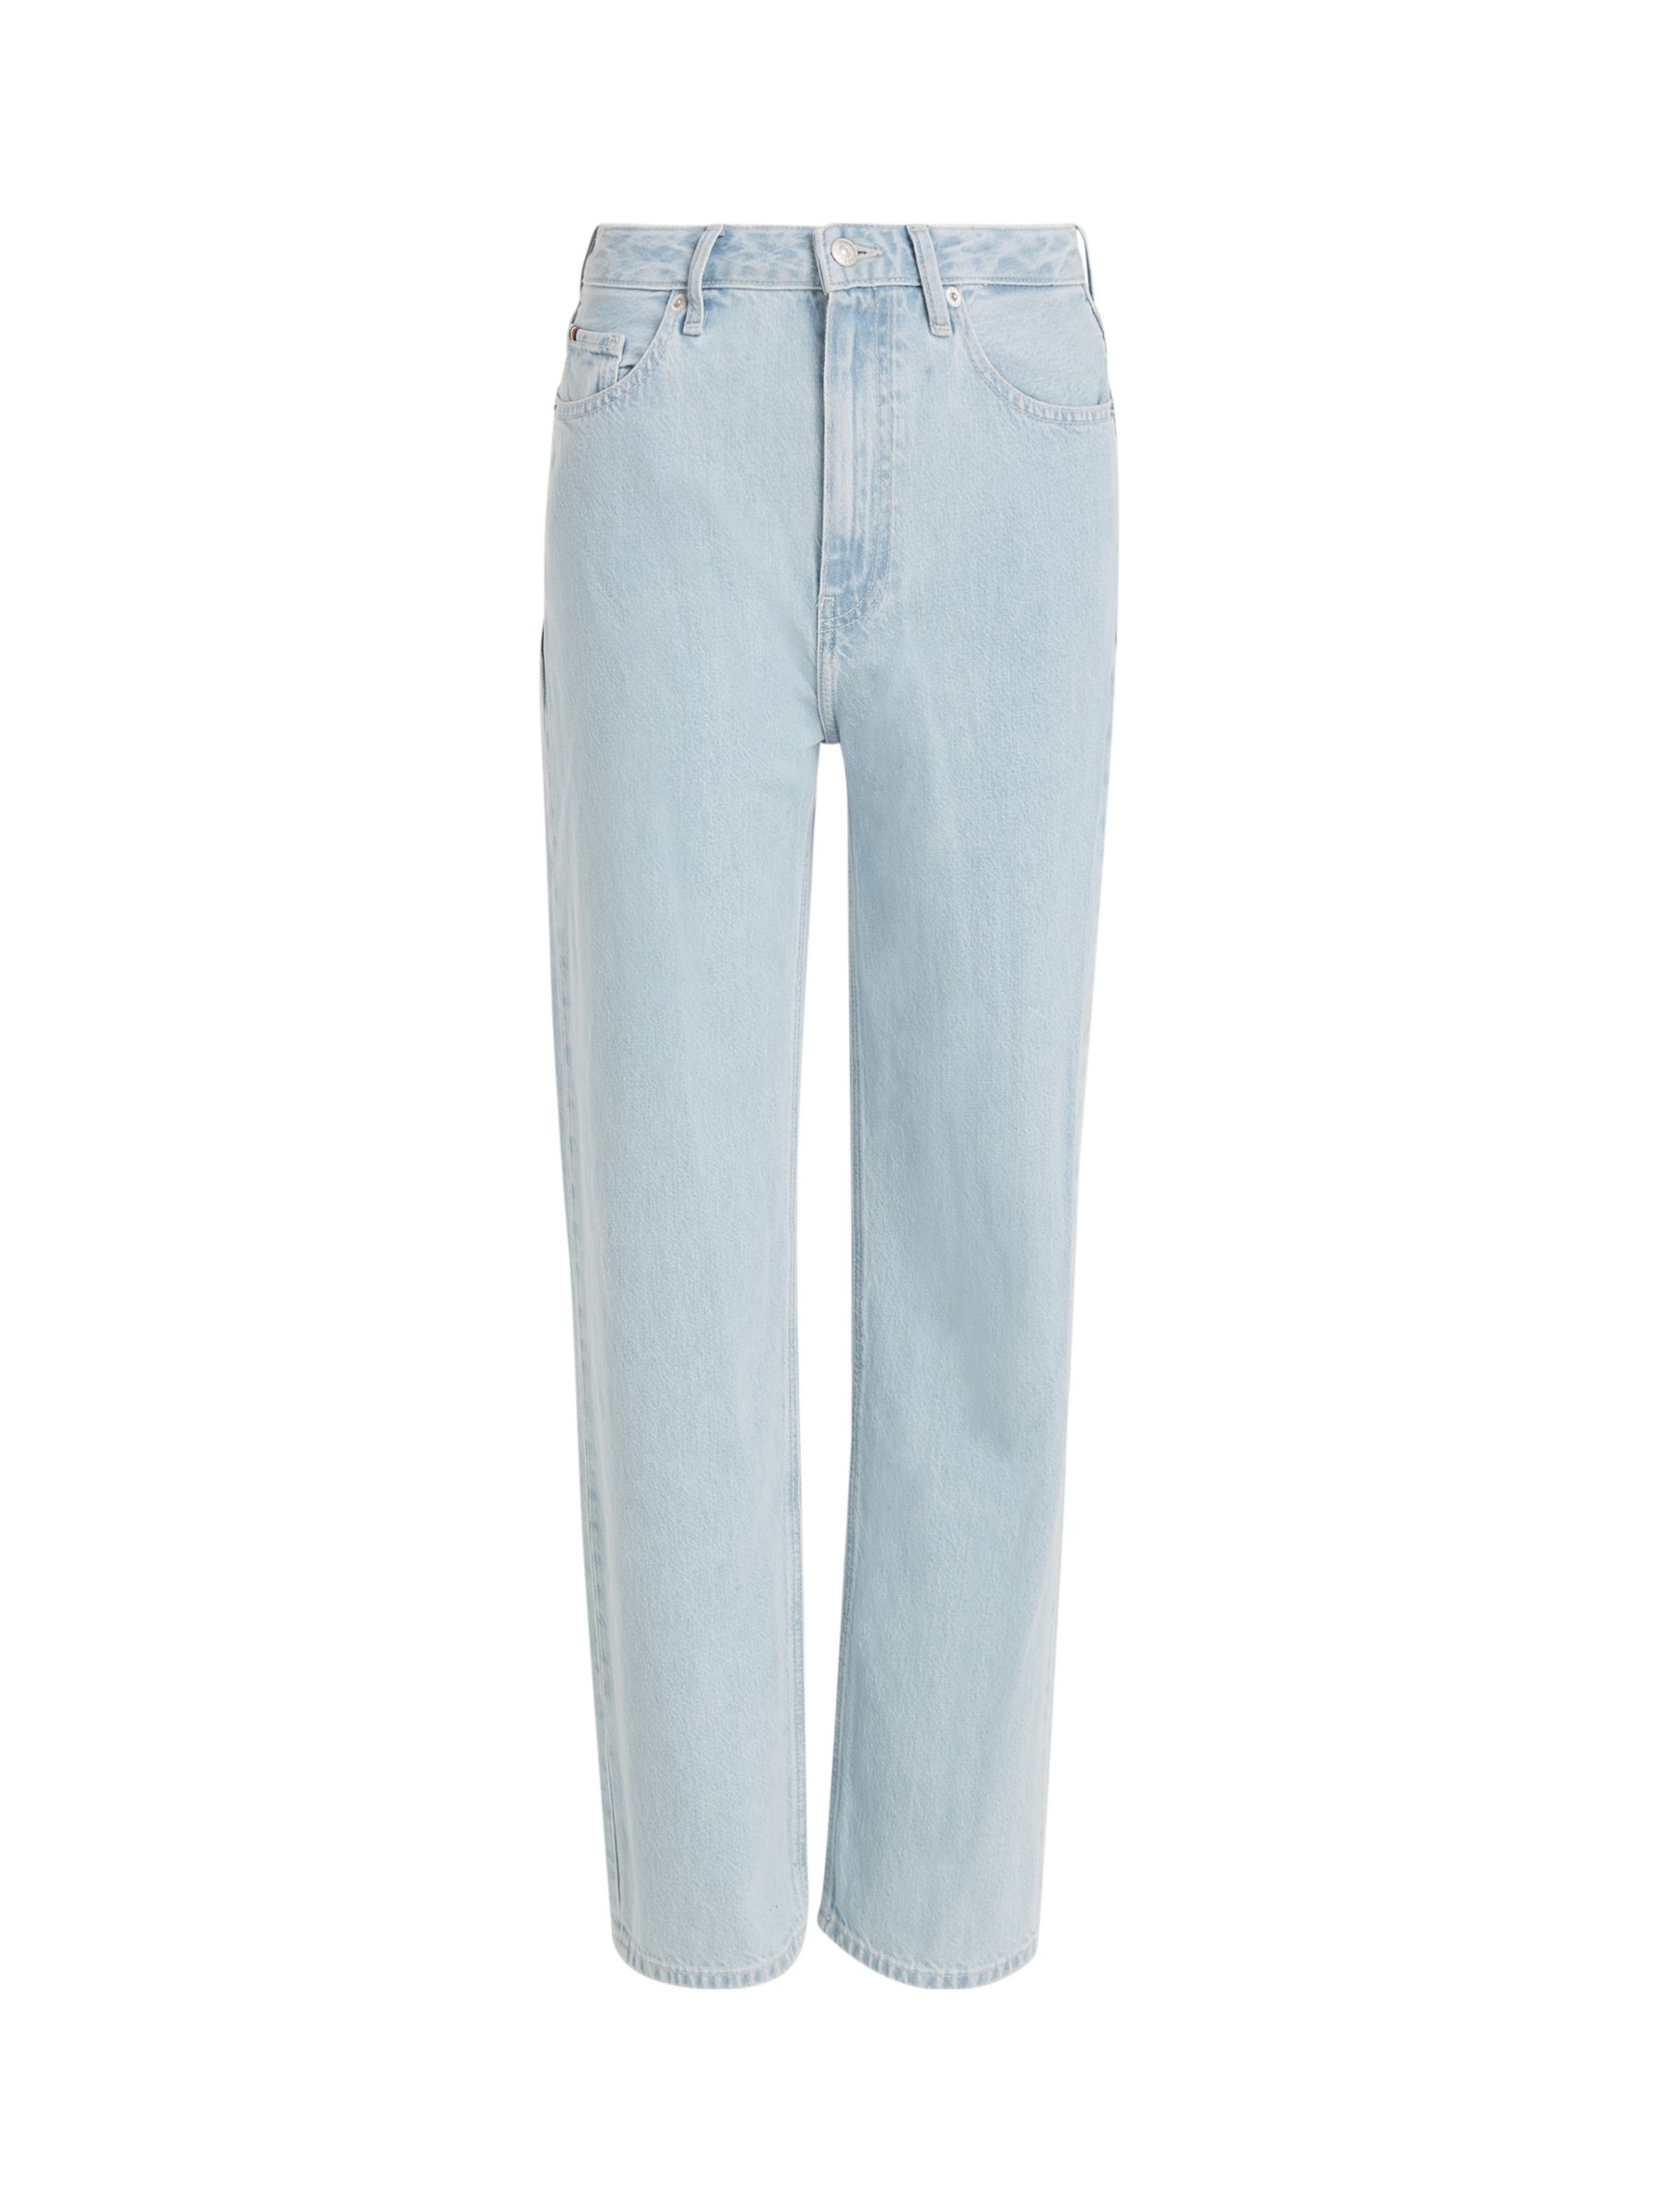 Tommy Hilfiger Relaxed Fit Straight Cut Jeans, Mia, 25R